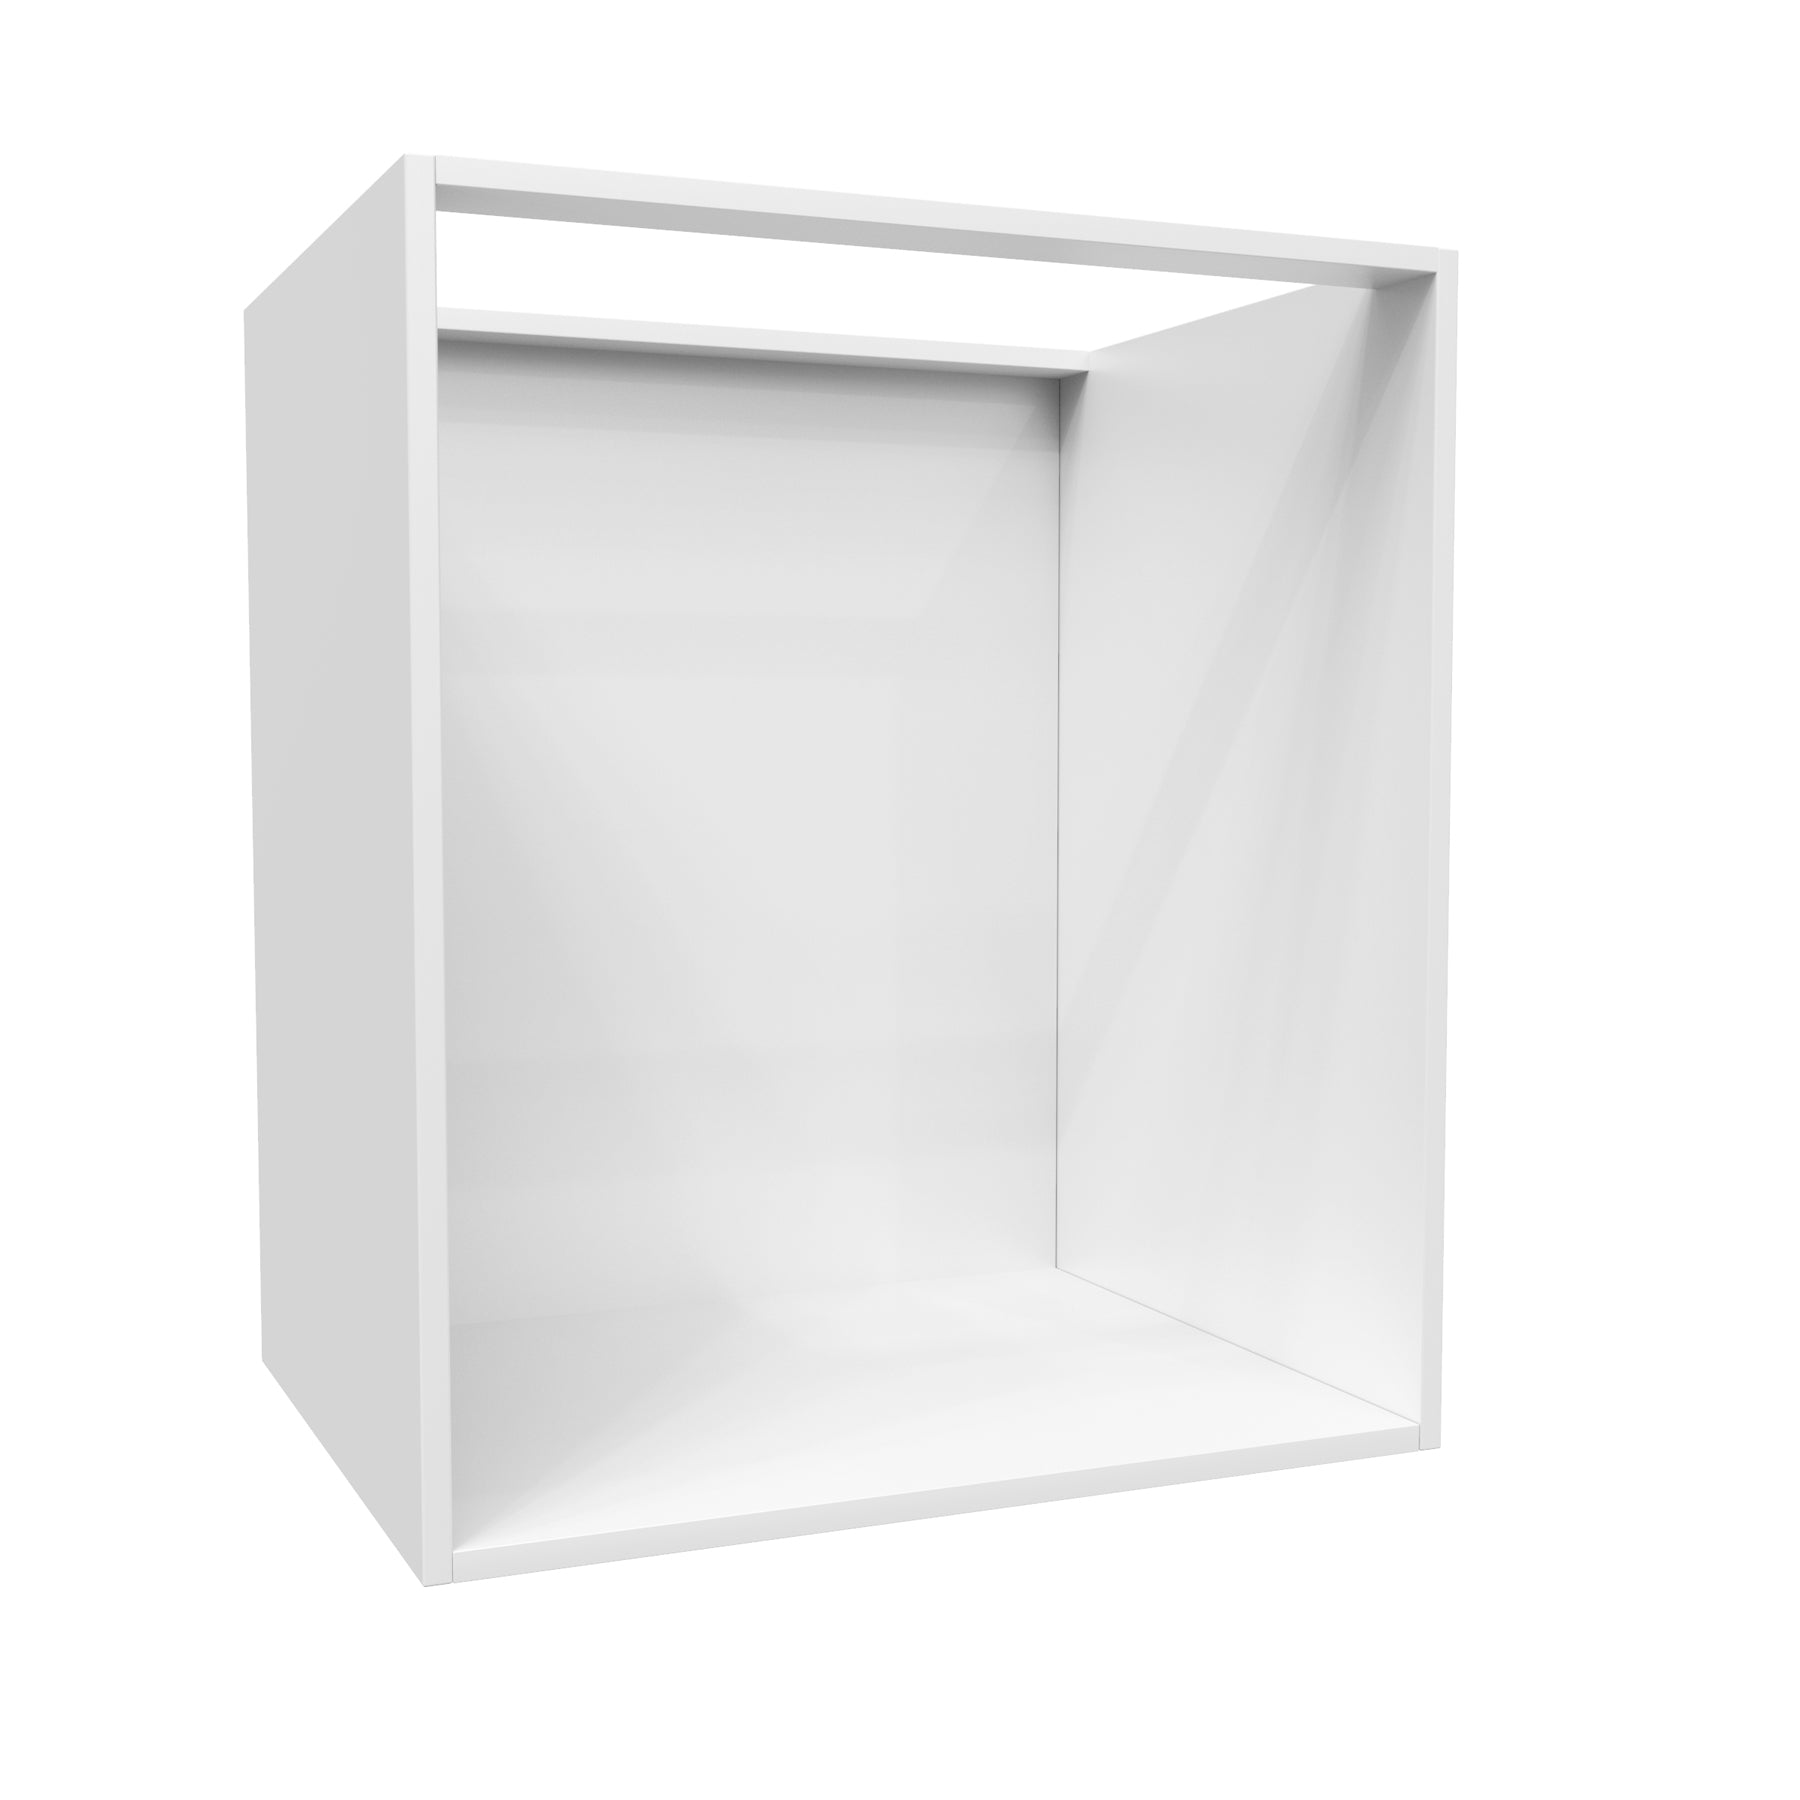 Oven Base Cabinet | Milano White | 30W x 34.5H x 24D